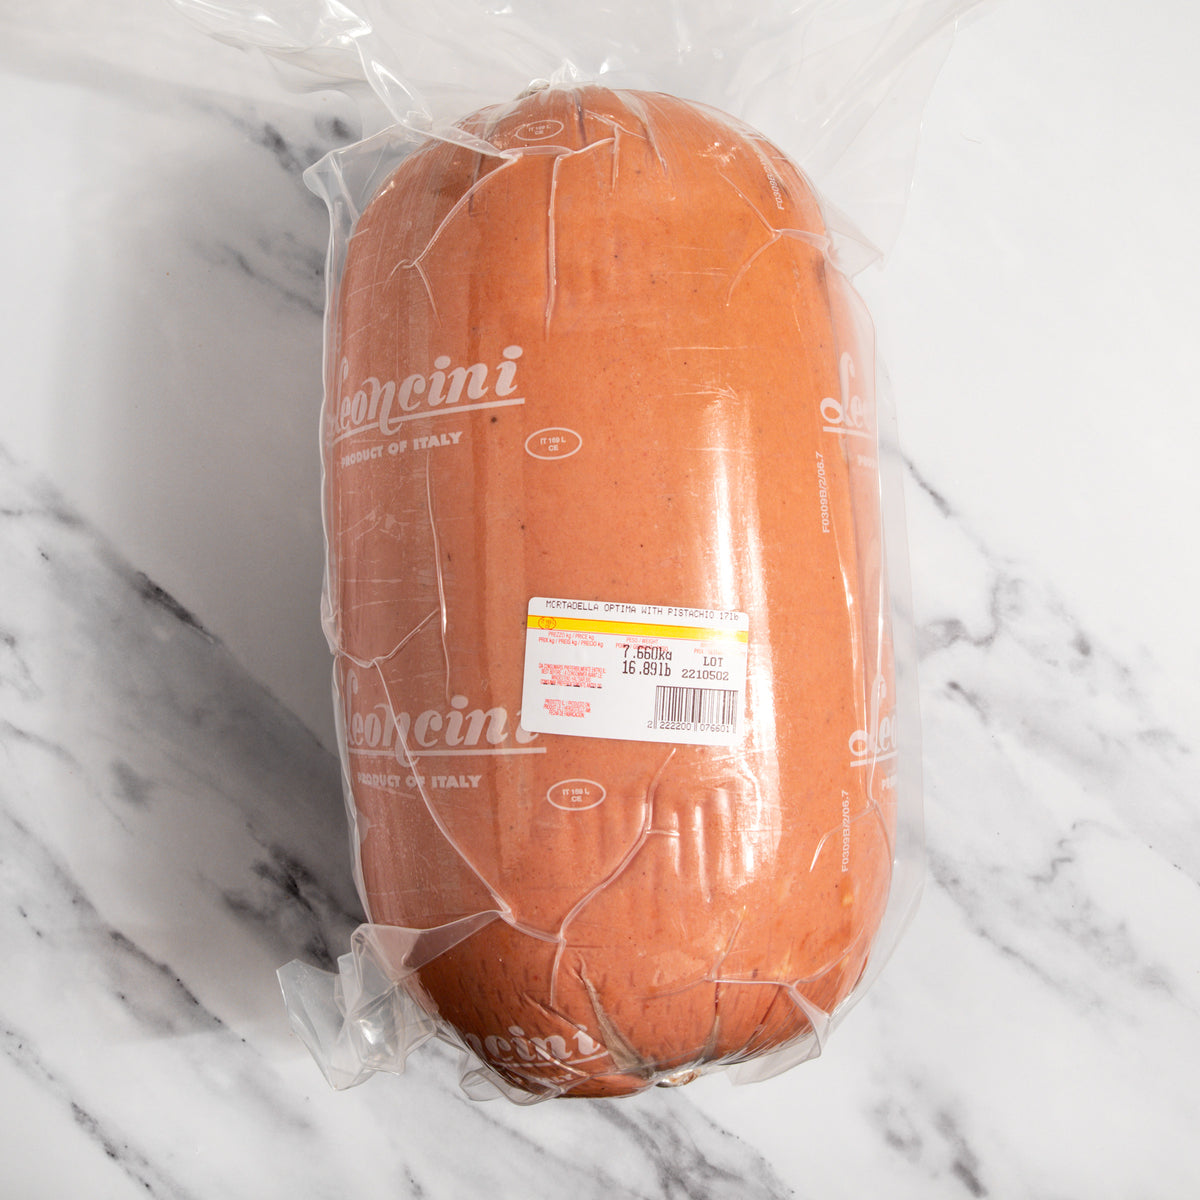 Visit our online store to find the newest Mortadella with